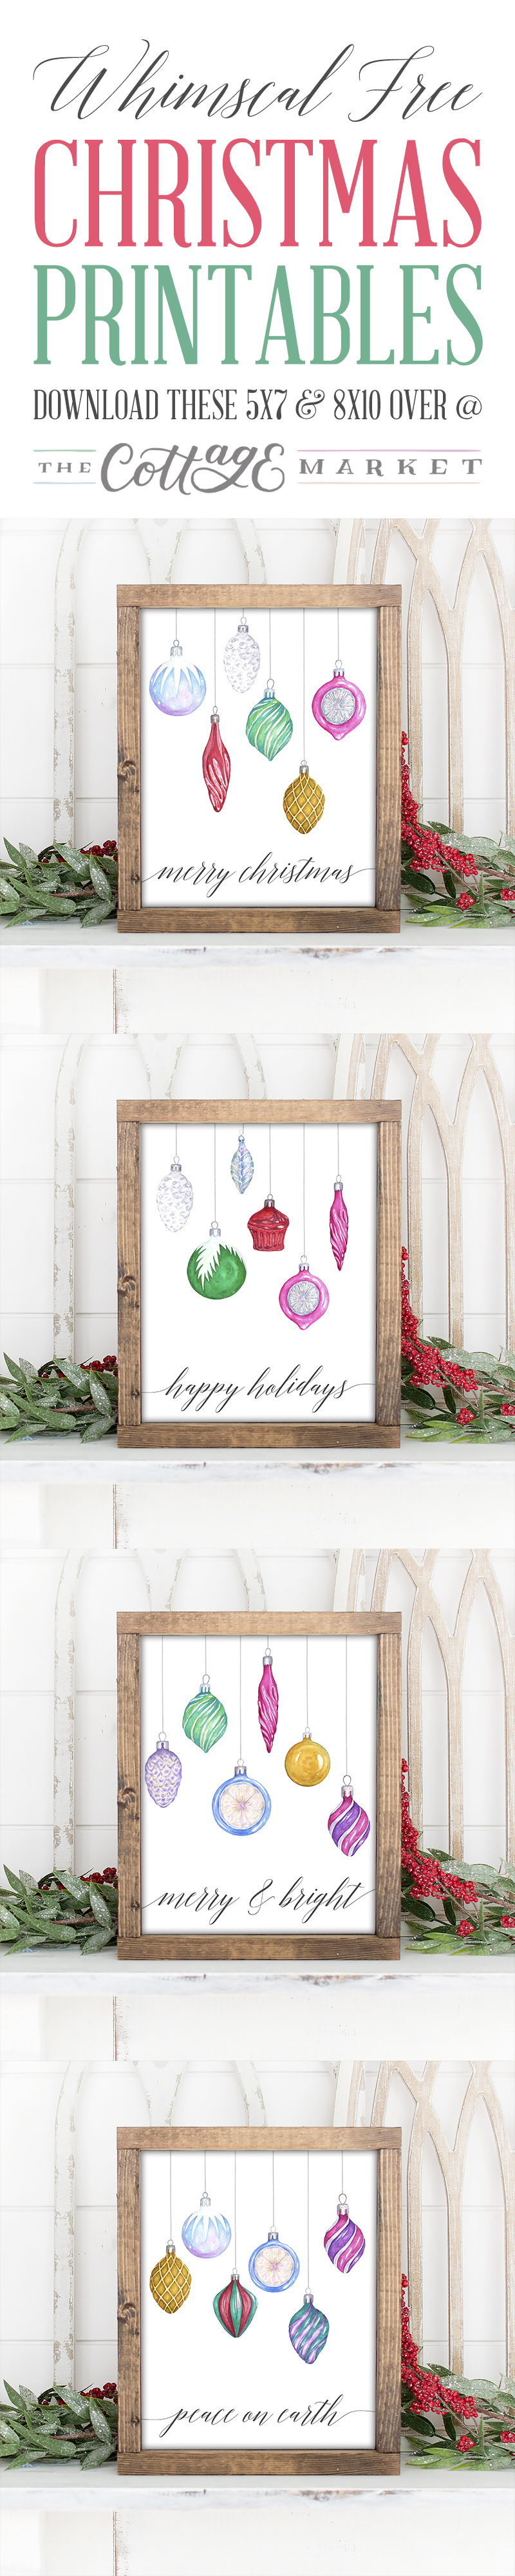 Start your Holiday Decorating with these Pretty and Whimsical Free Christmas Printables we have for your today!  They come in 2 sizes for your convenience... ENJOY!